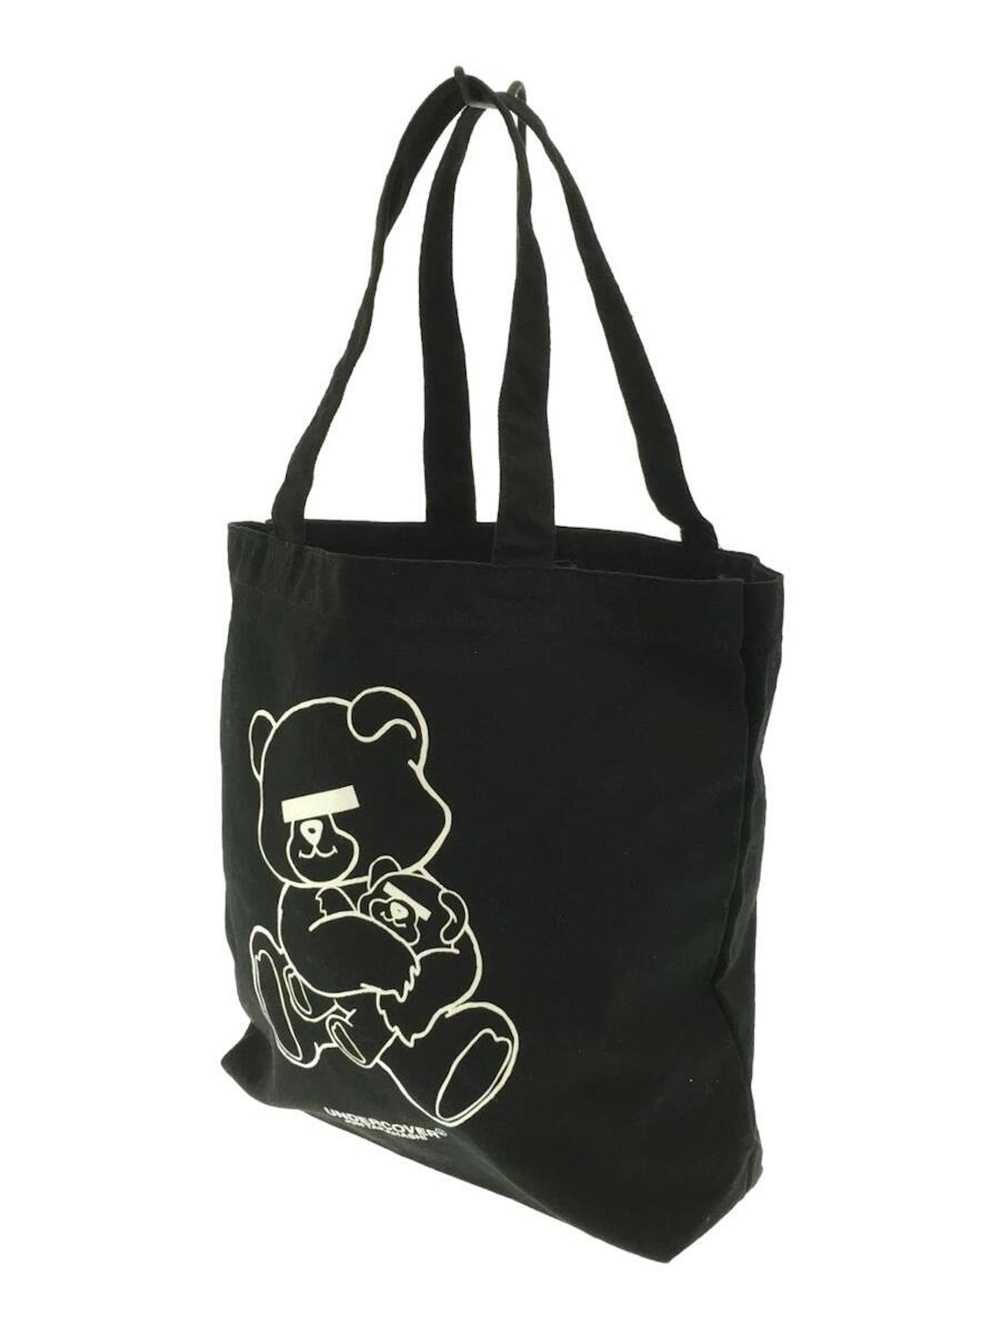 Undercover Blindfold Bear Tote Bag - image 2